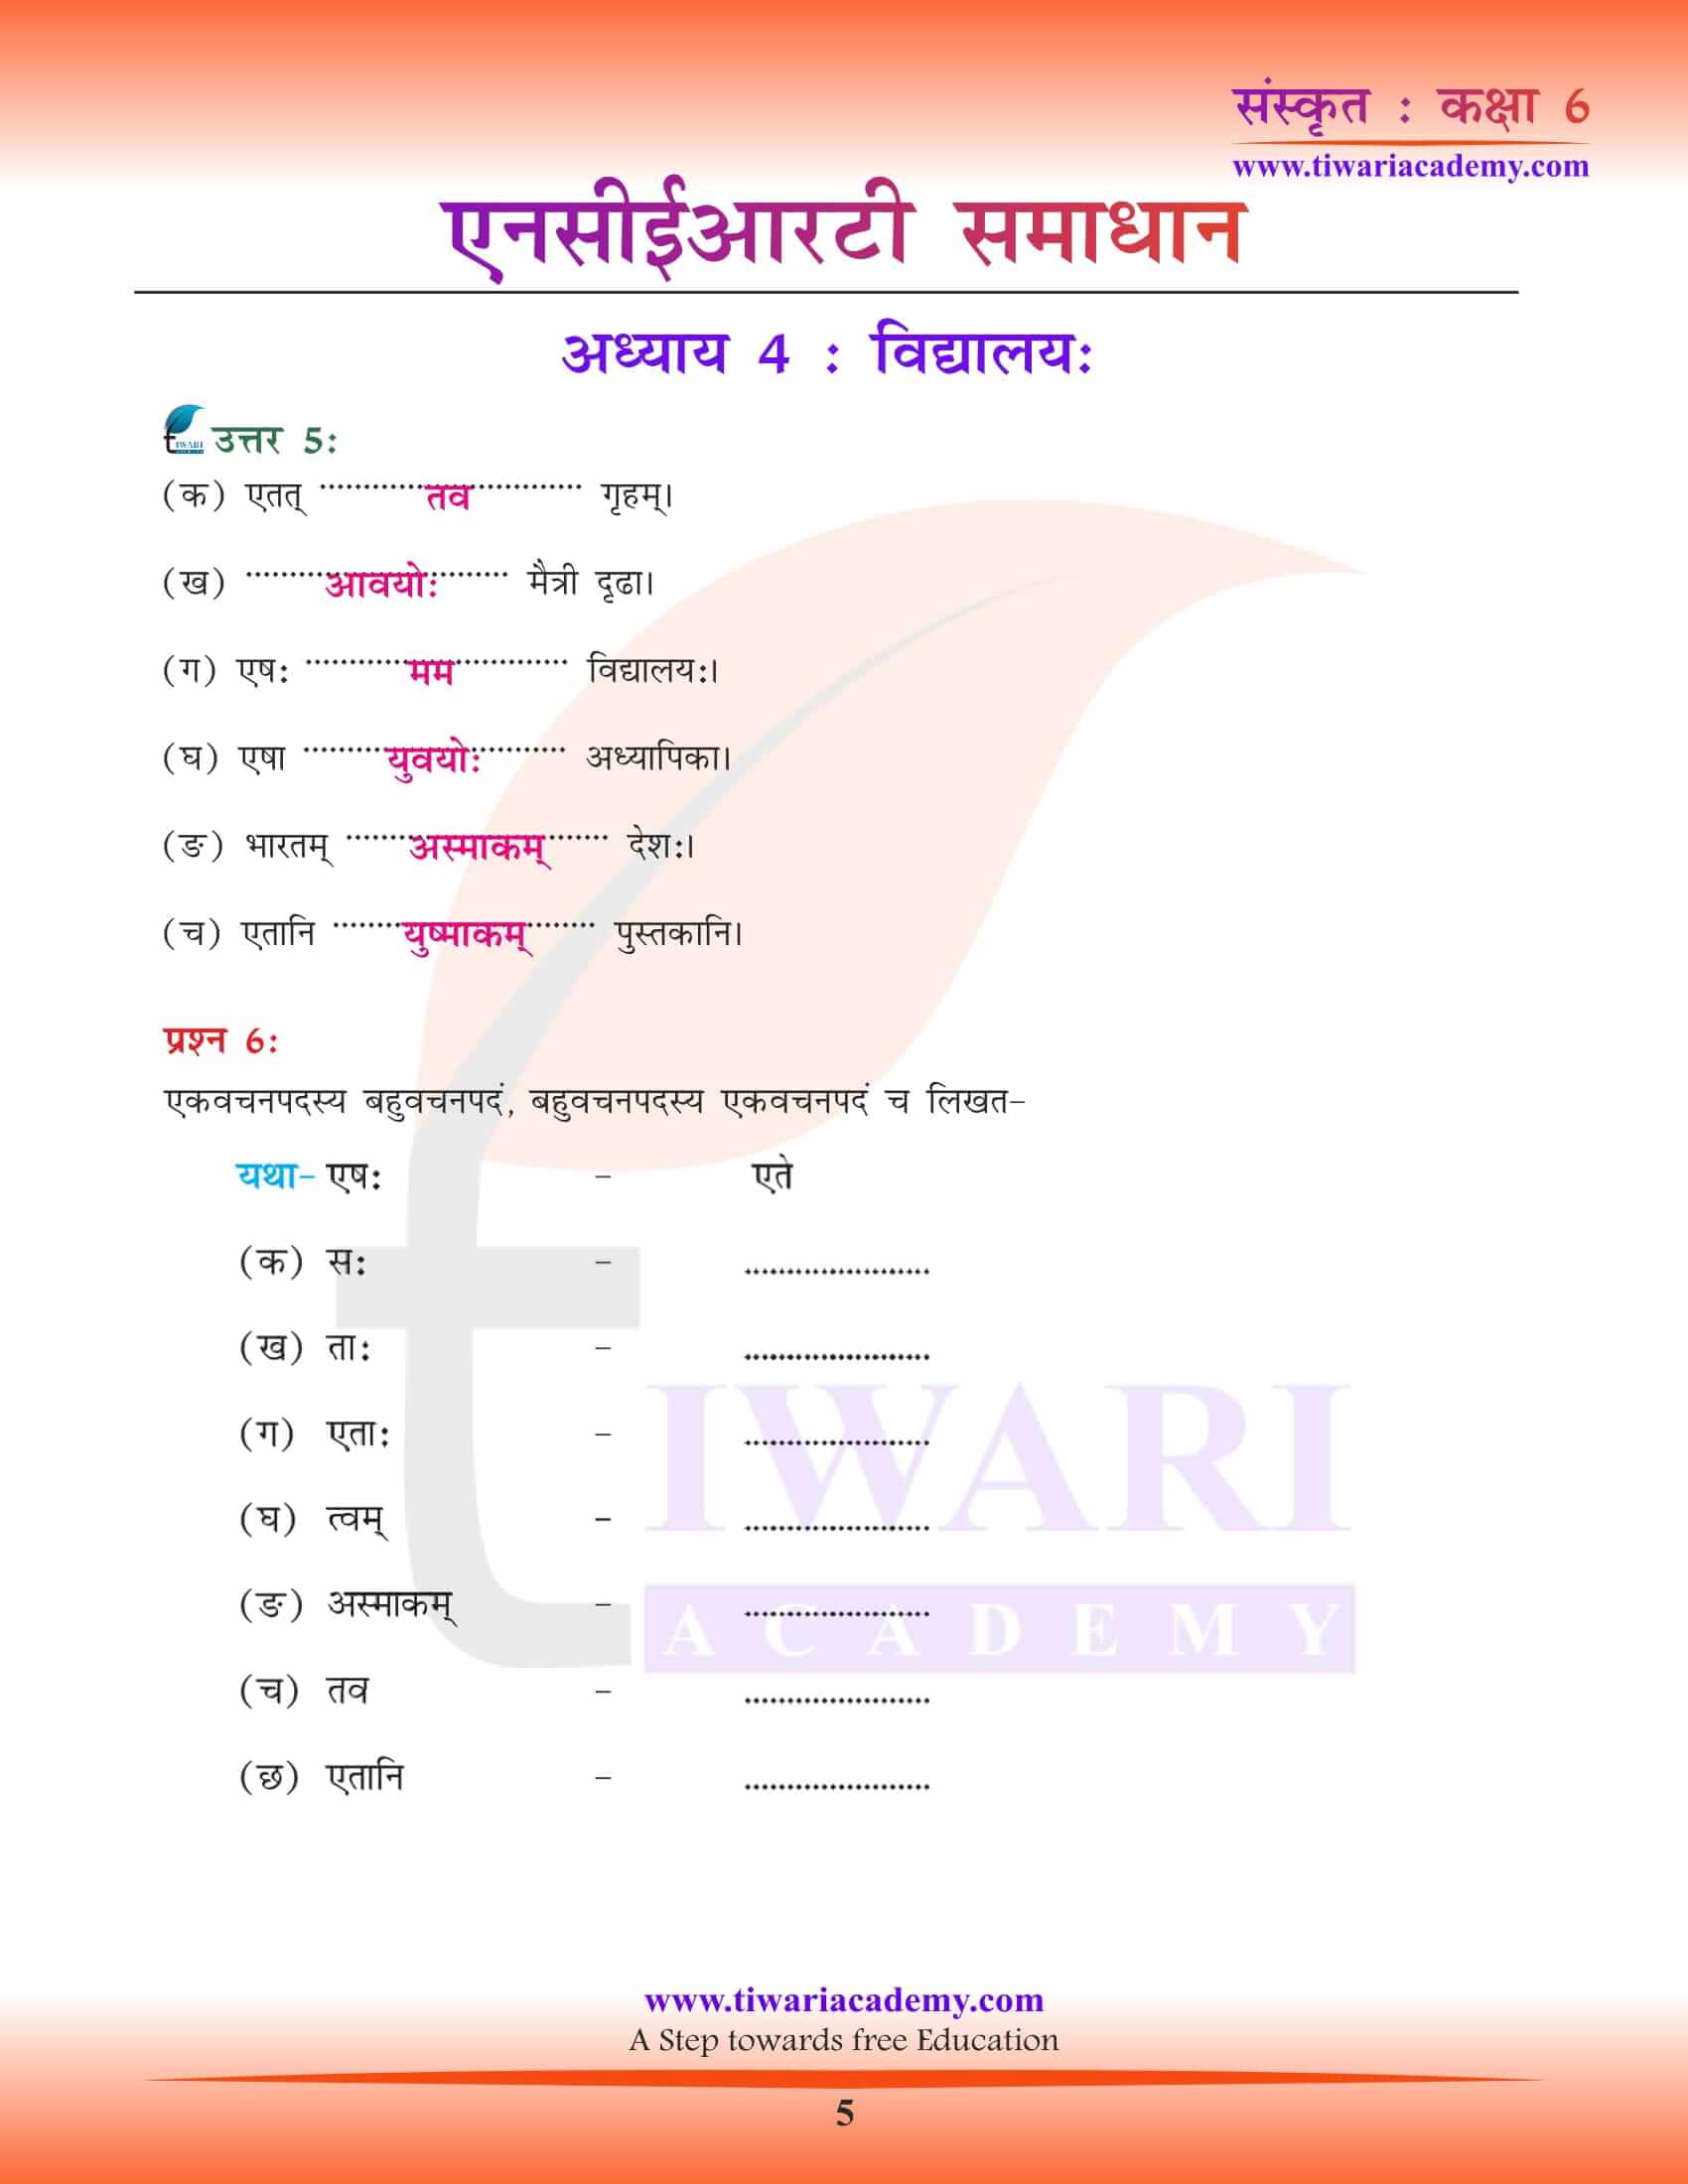 NCERT Solutions for Class 6 Sanskrit Chapter 4 answers